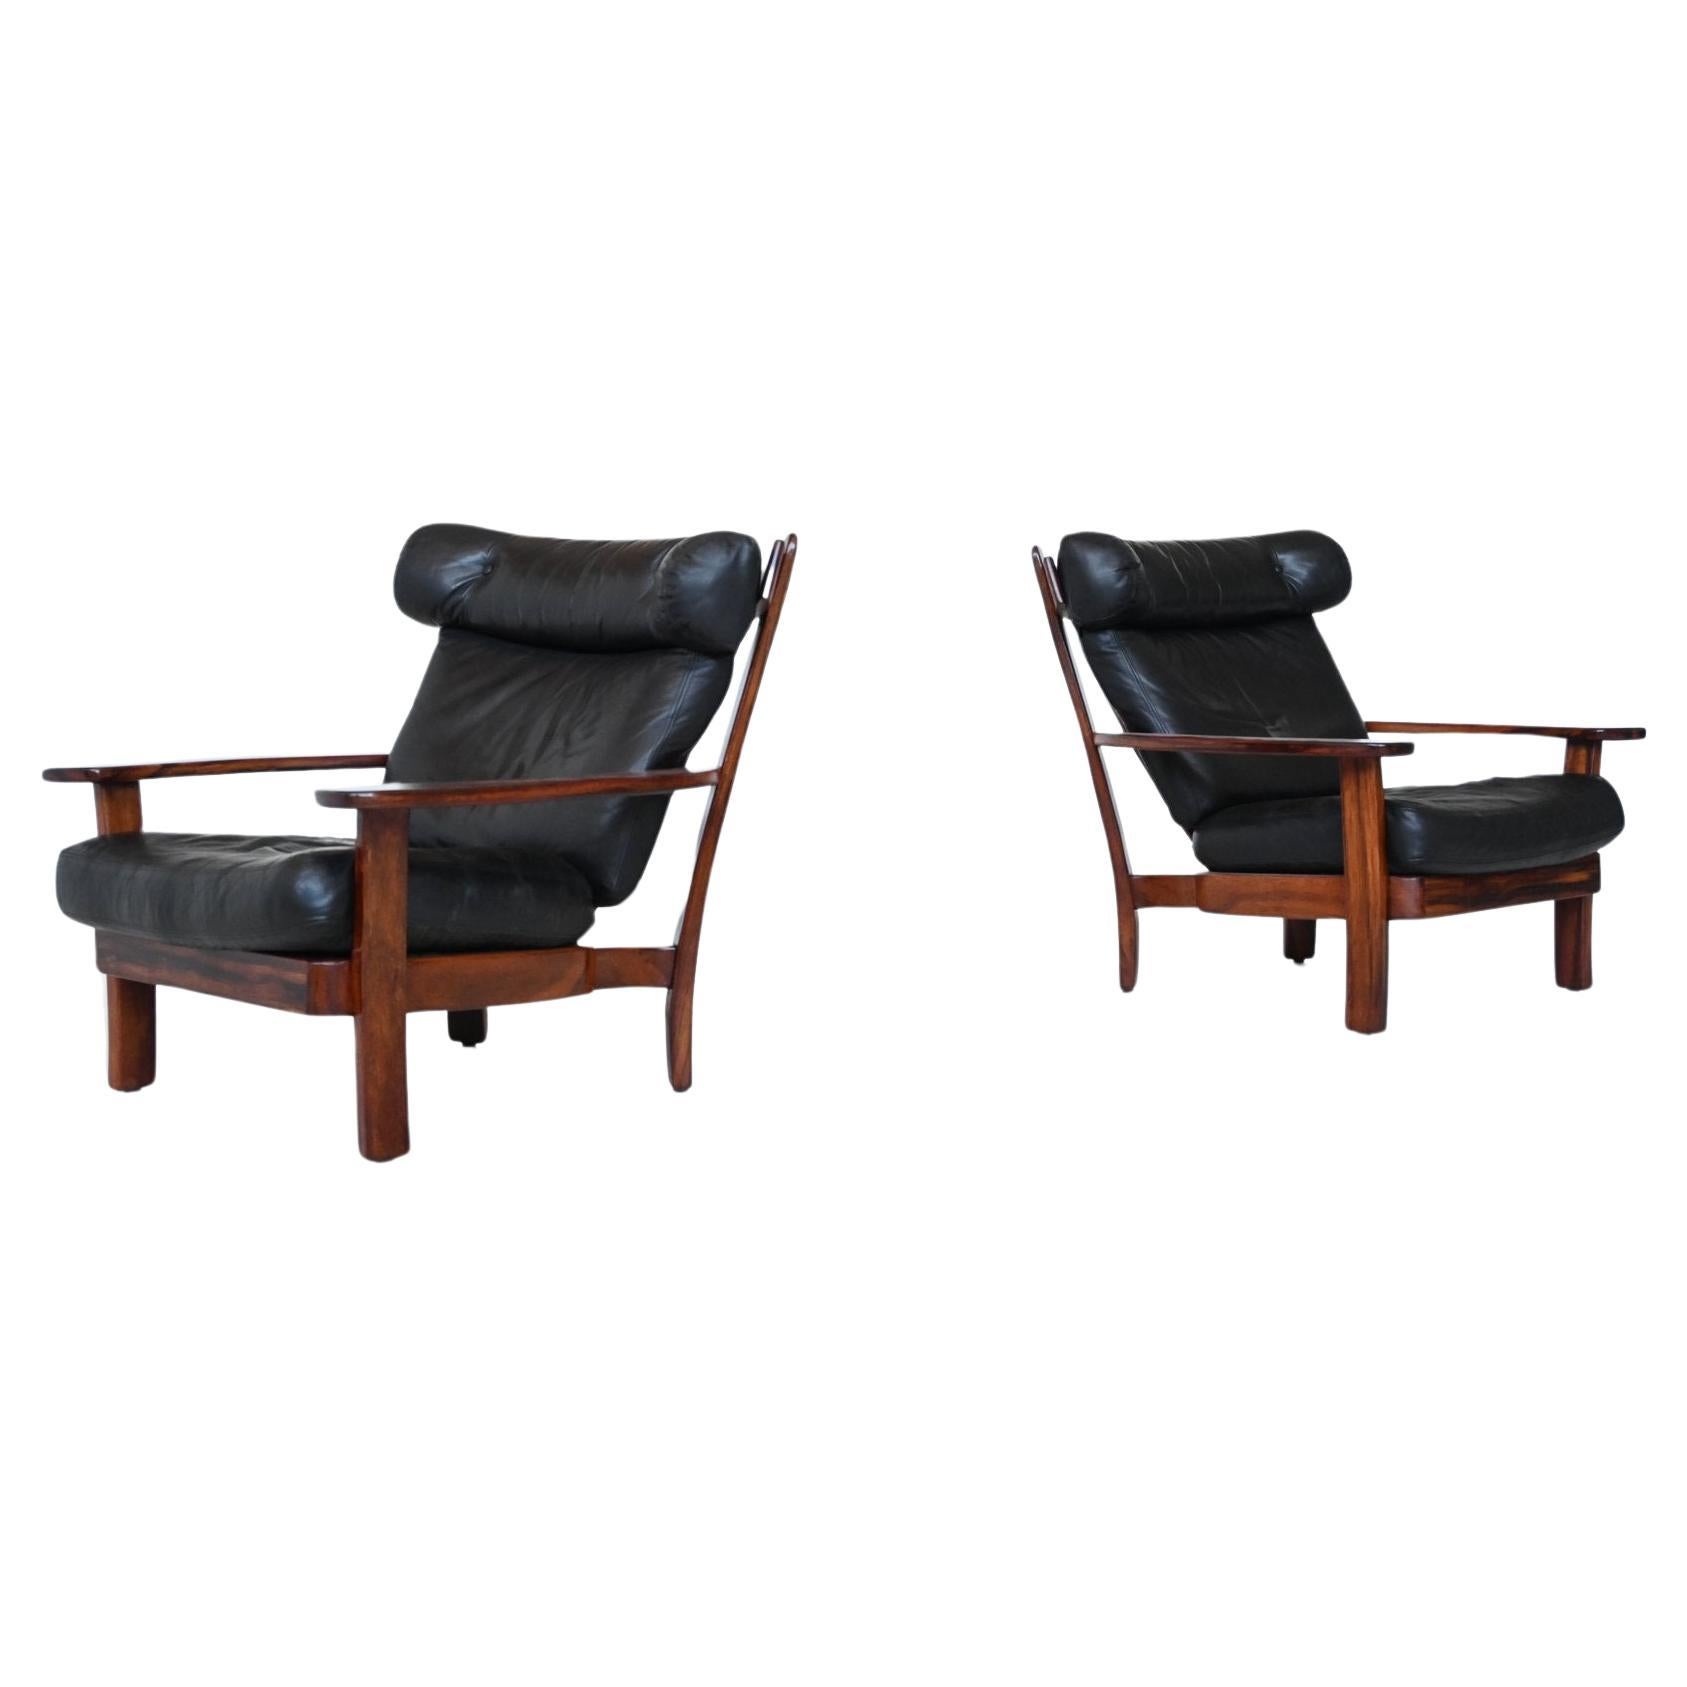 Beautiful shaped pair of Brazilian lounge chairs in the style of Sergio Rodrigues, Brazil 1960. These well-crafted chairs are great looking from all sides and they sit also very comfortable. The frame is made of heavy solid Jacaranda rosewood and